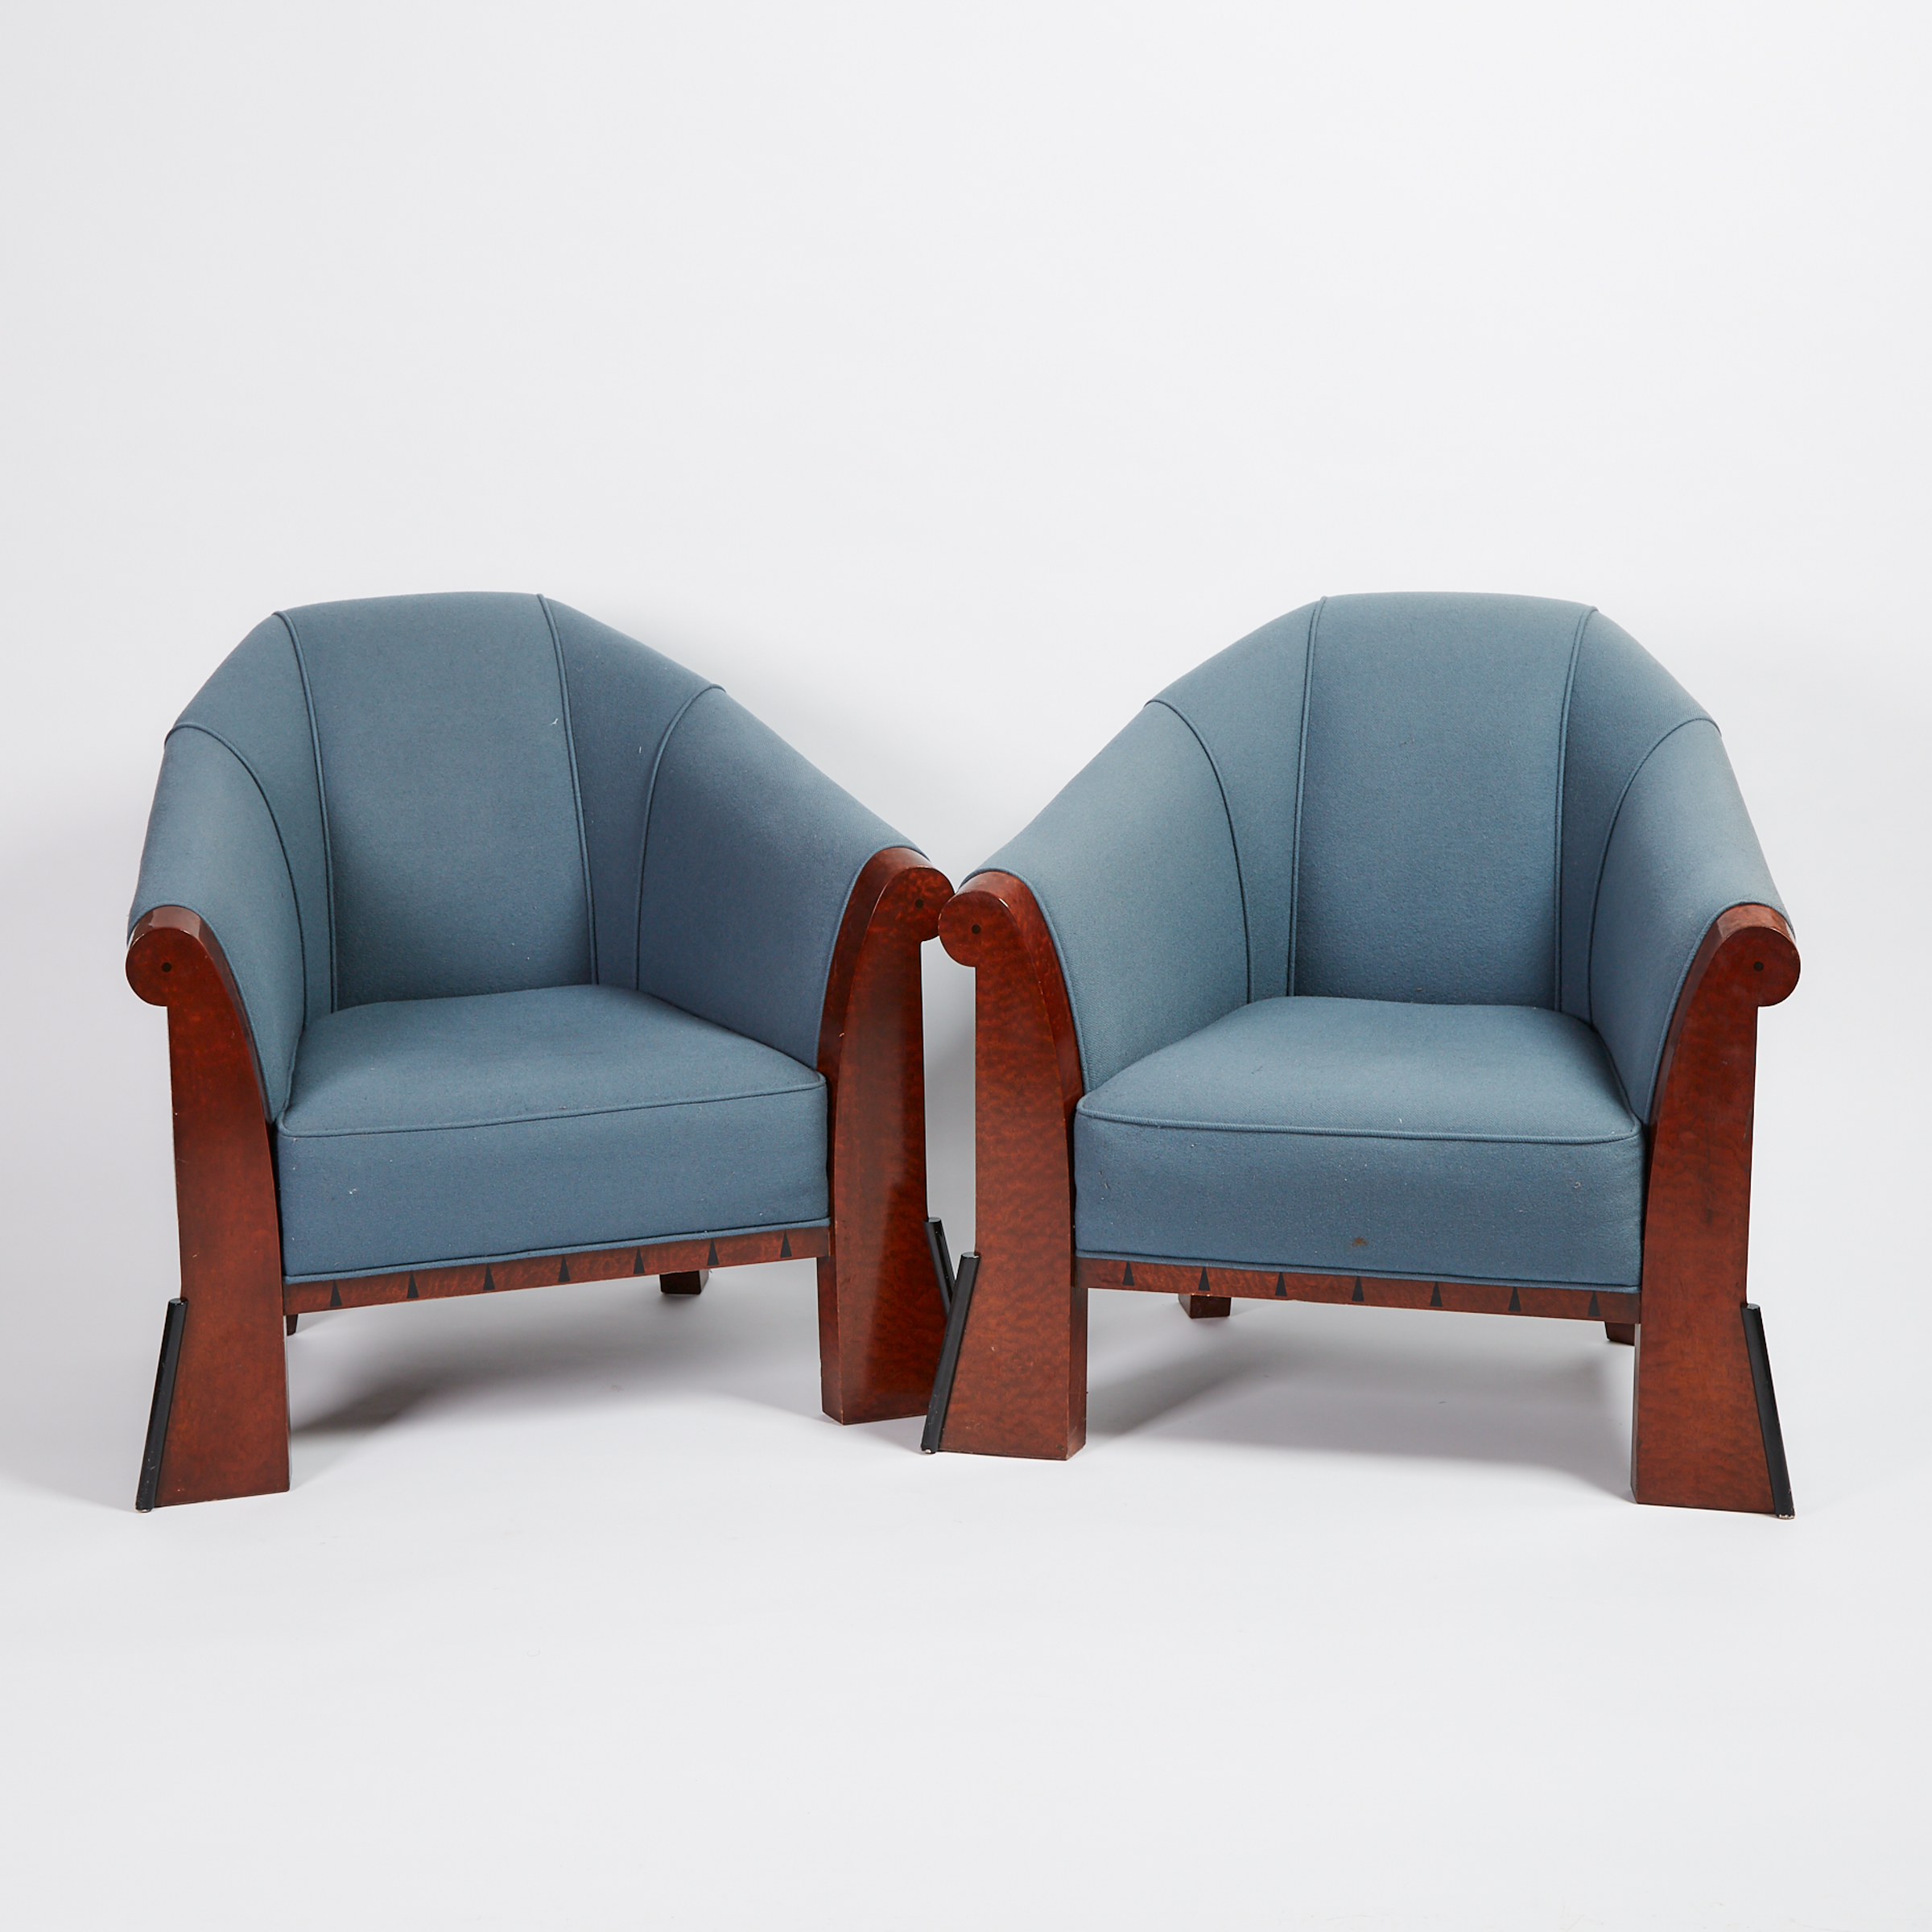 Pair of Lounge Chairs by Michael Graves for Sunar Hauserman, c.1980